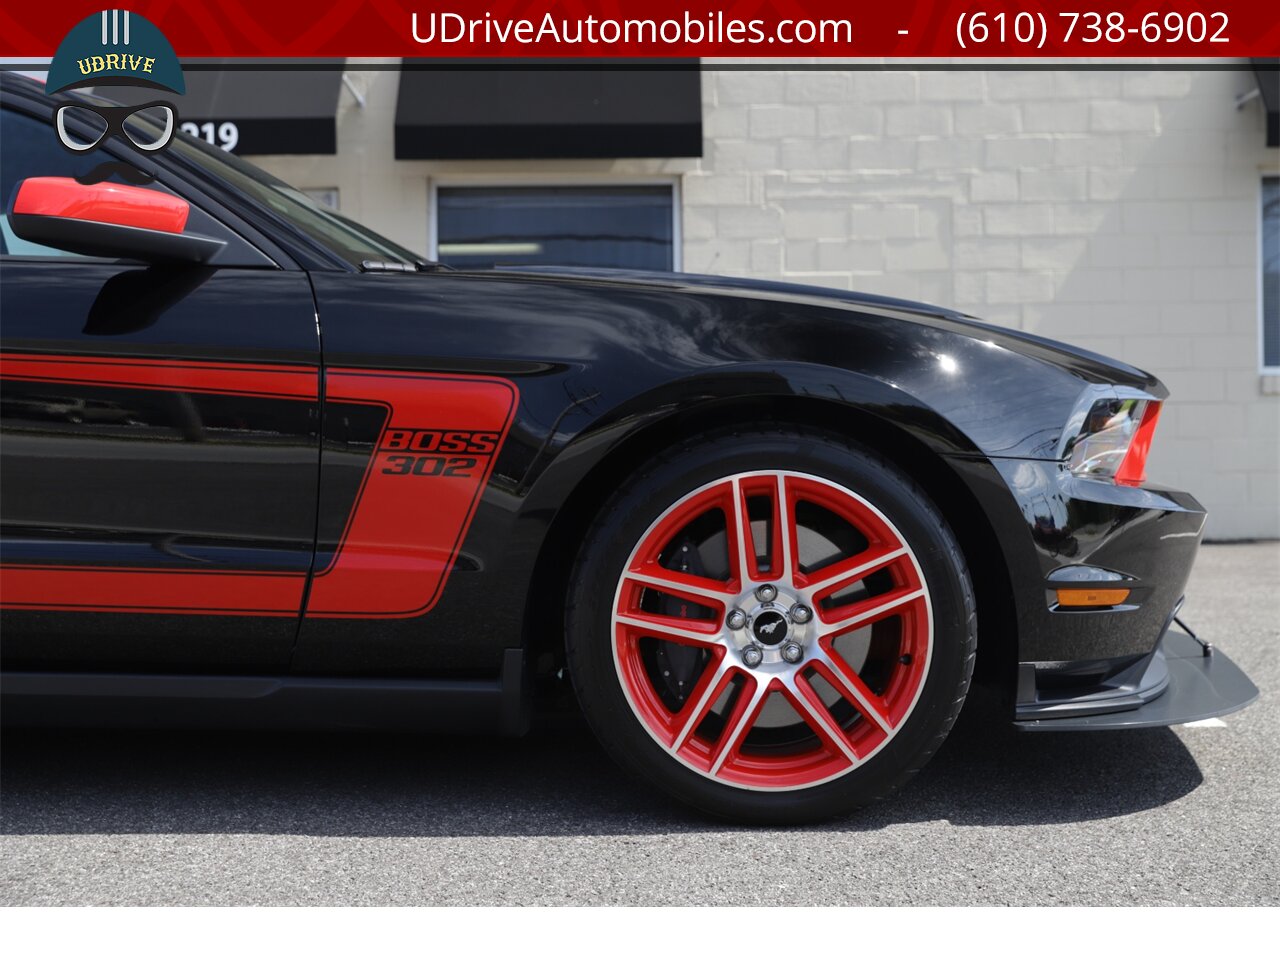 2012 Ford Mustang 866 Miles Boss 302 Laguna Seca #338 of 750  Red TracKey Activated - Photo 15 - West Chester, PA 19382